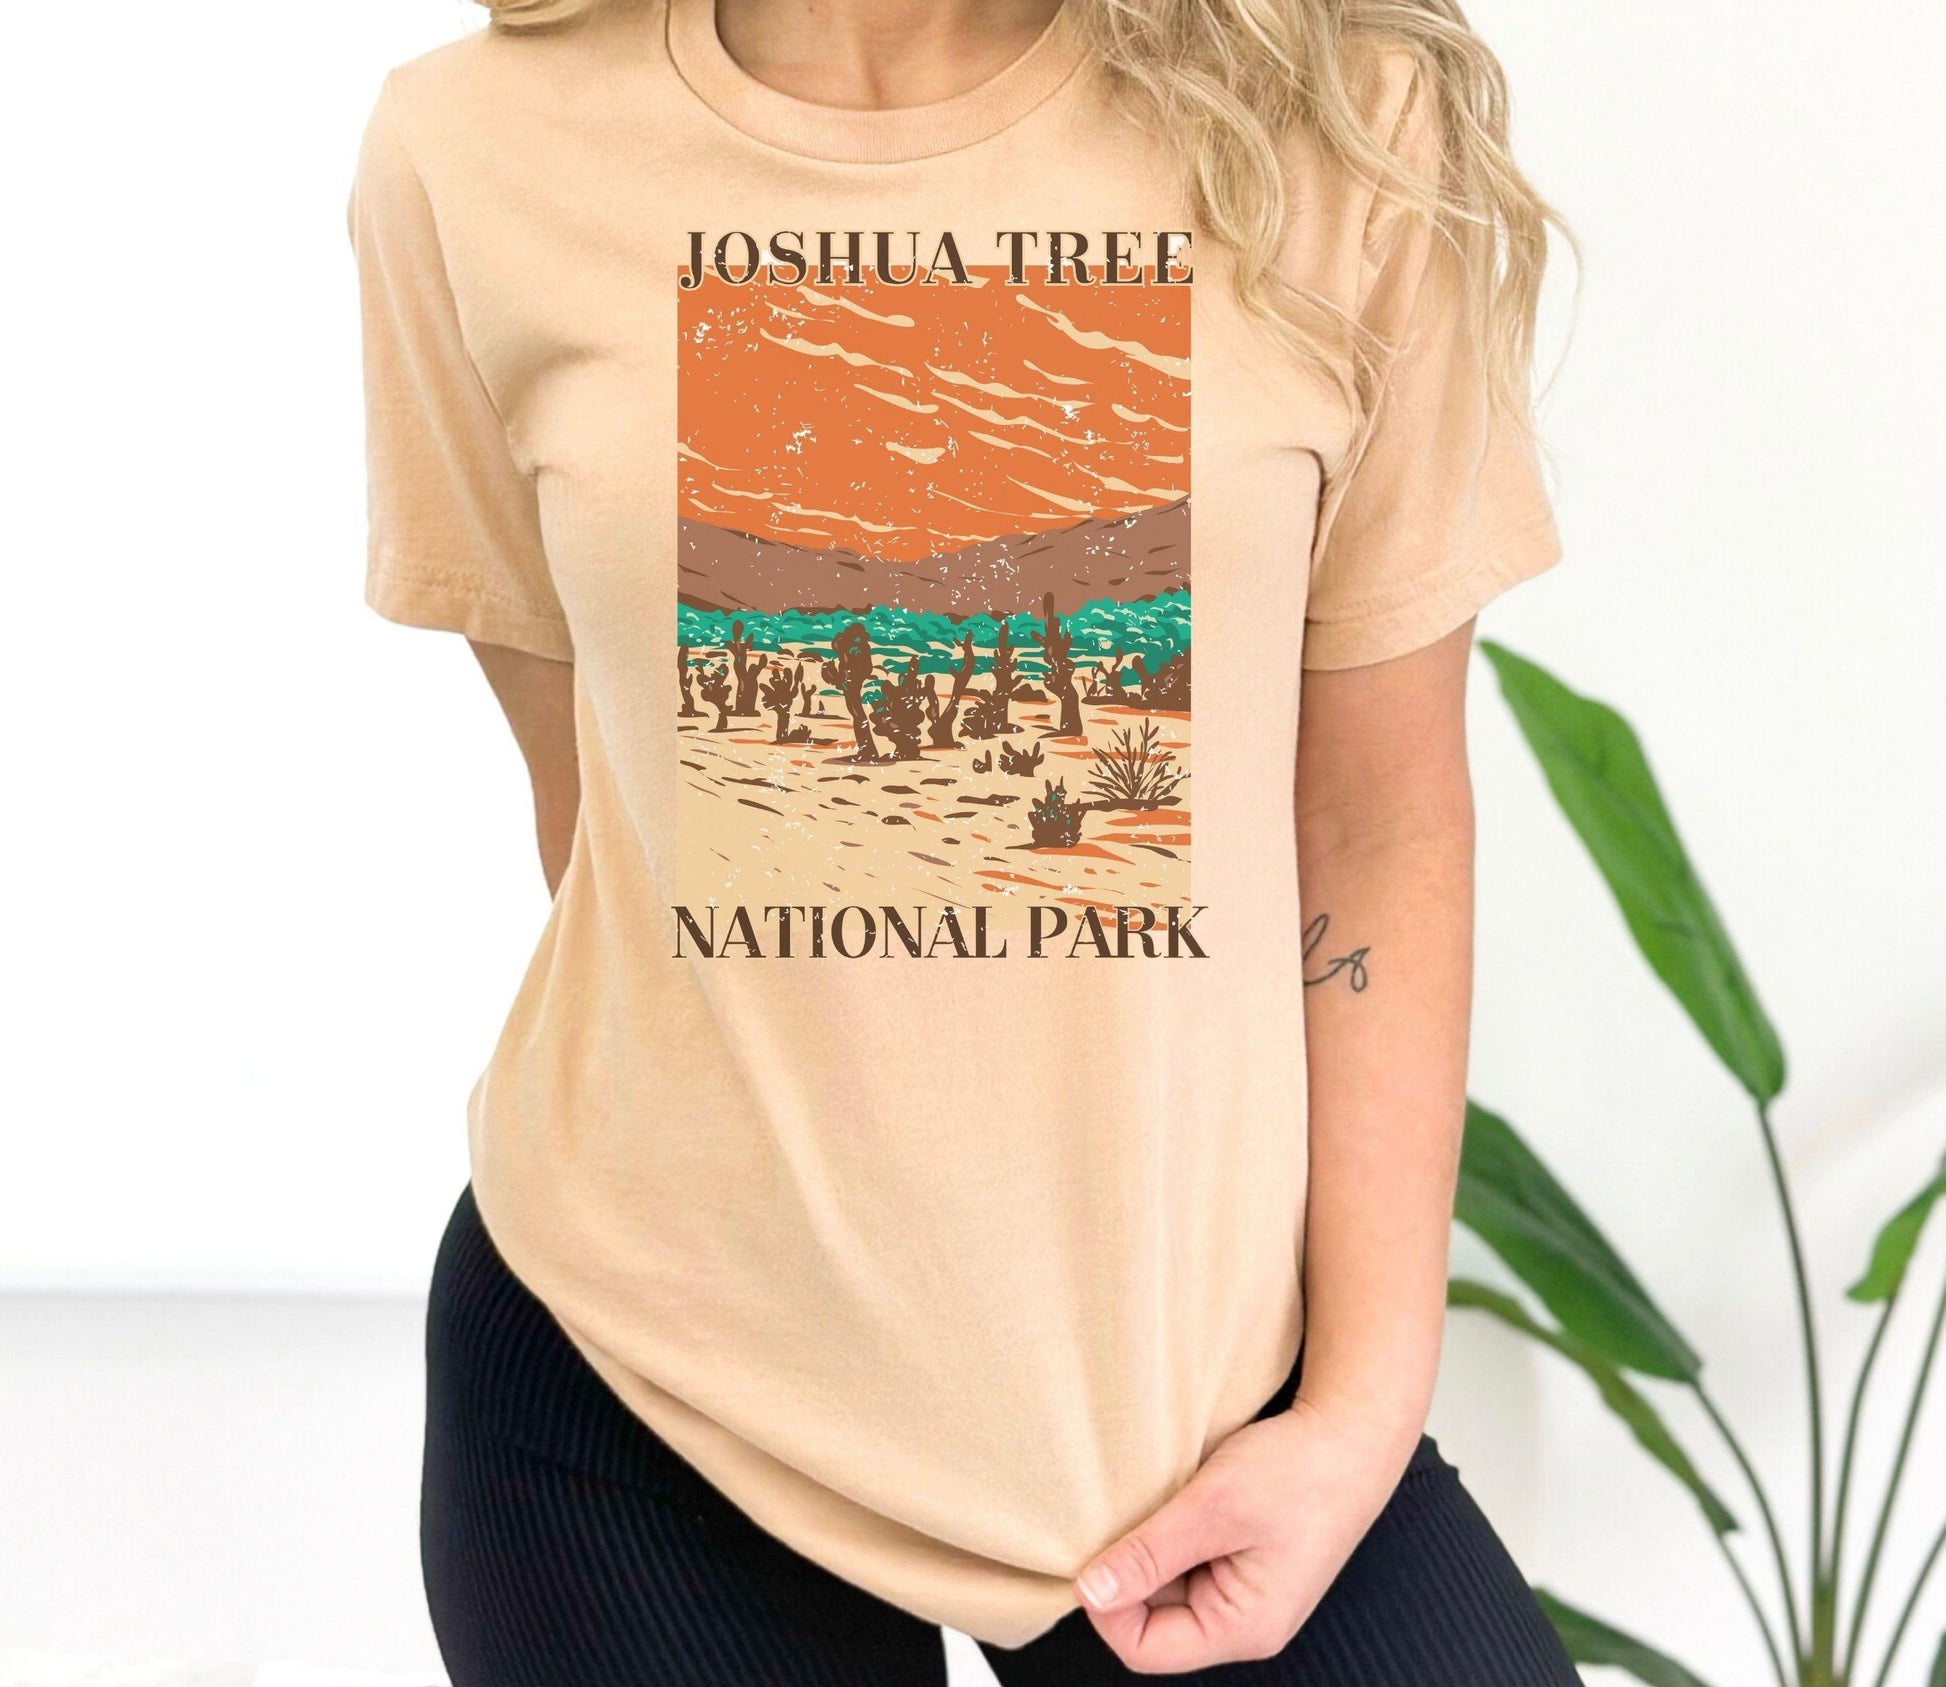 Bella Canvas T-shirt, National Park Souvenir, Hiking and Camping Apparel, National Park Graphic Sweatshirt, nature lover shirtjoshua tree national park, travel tshirt, hiking shirt, joshua california, Outdoor Adventure Apparel, National Park Gifts